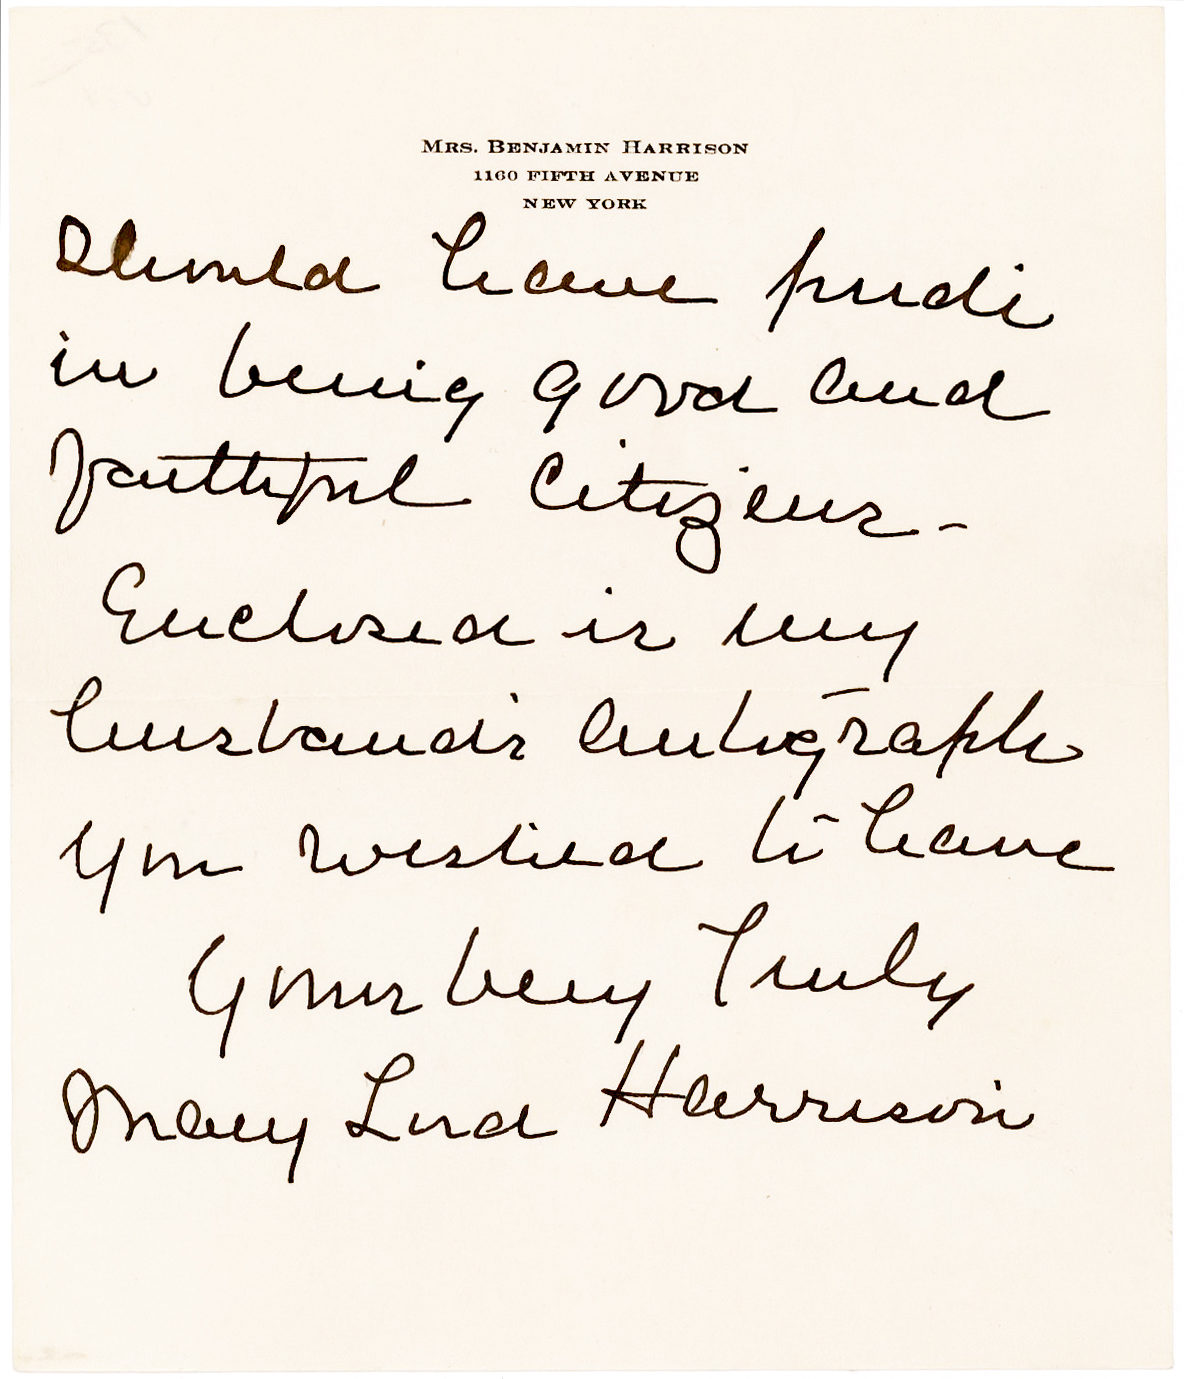 Mary Lord Harrison letter